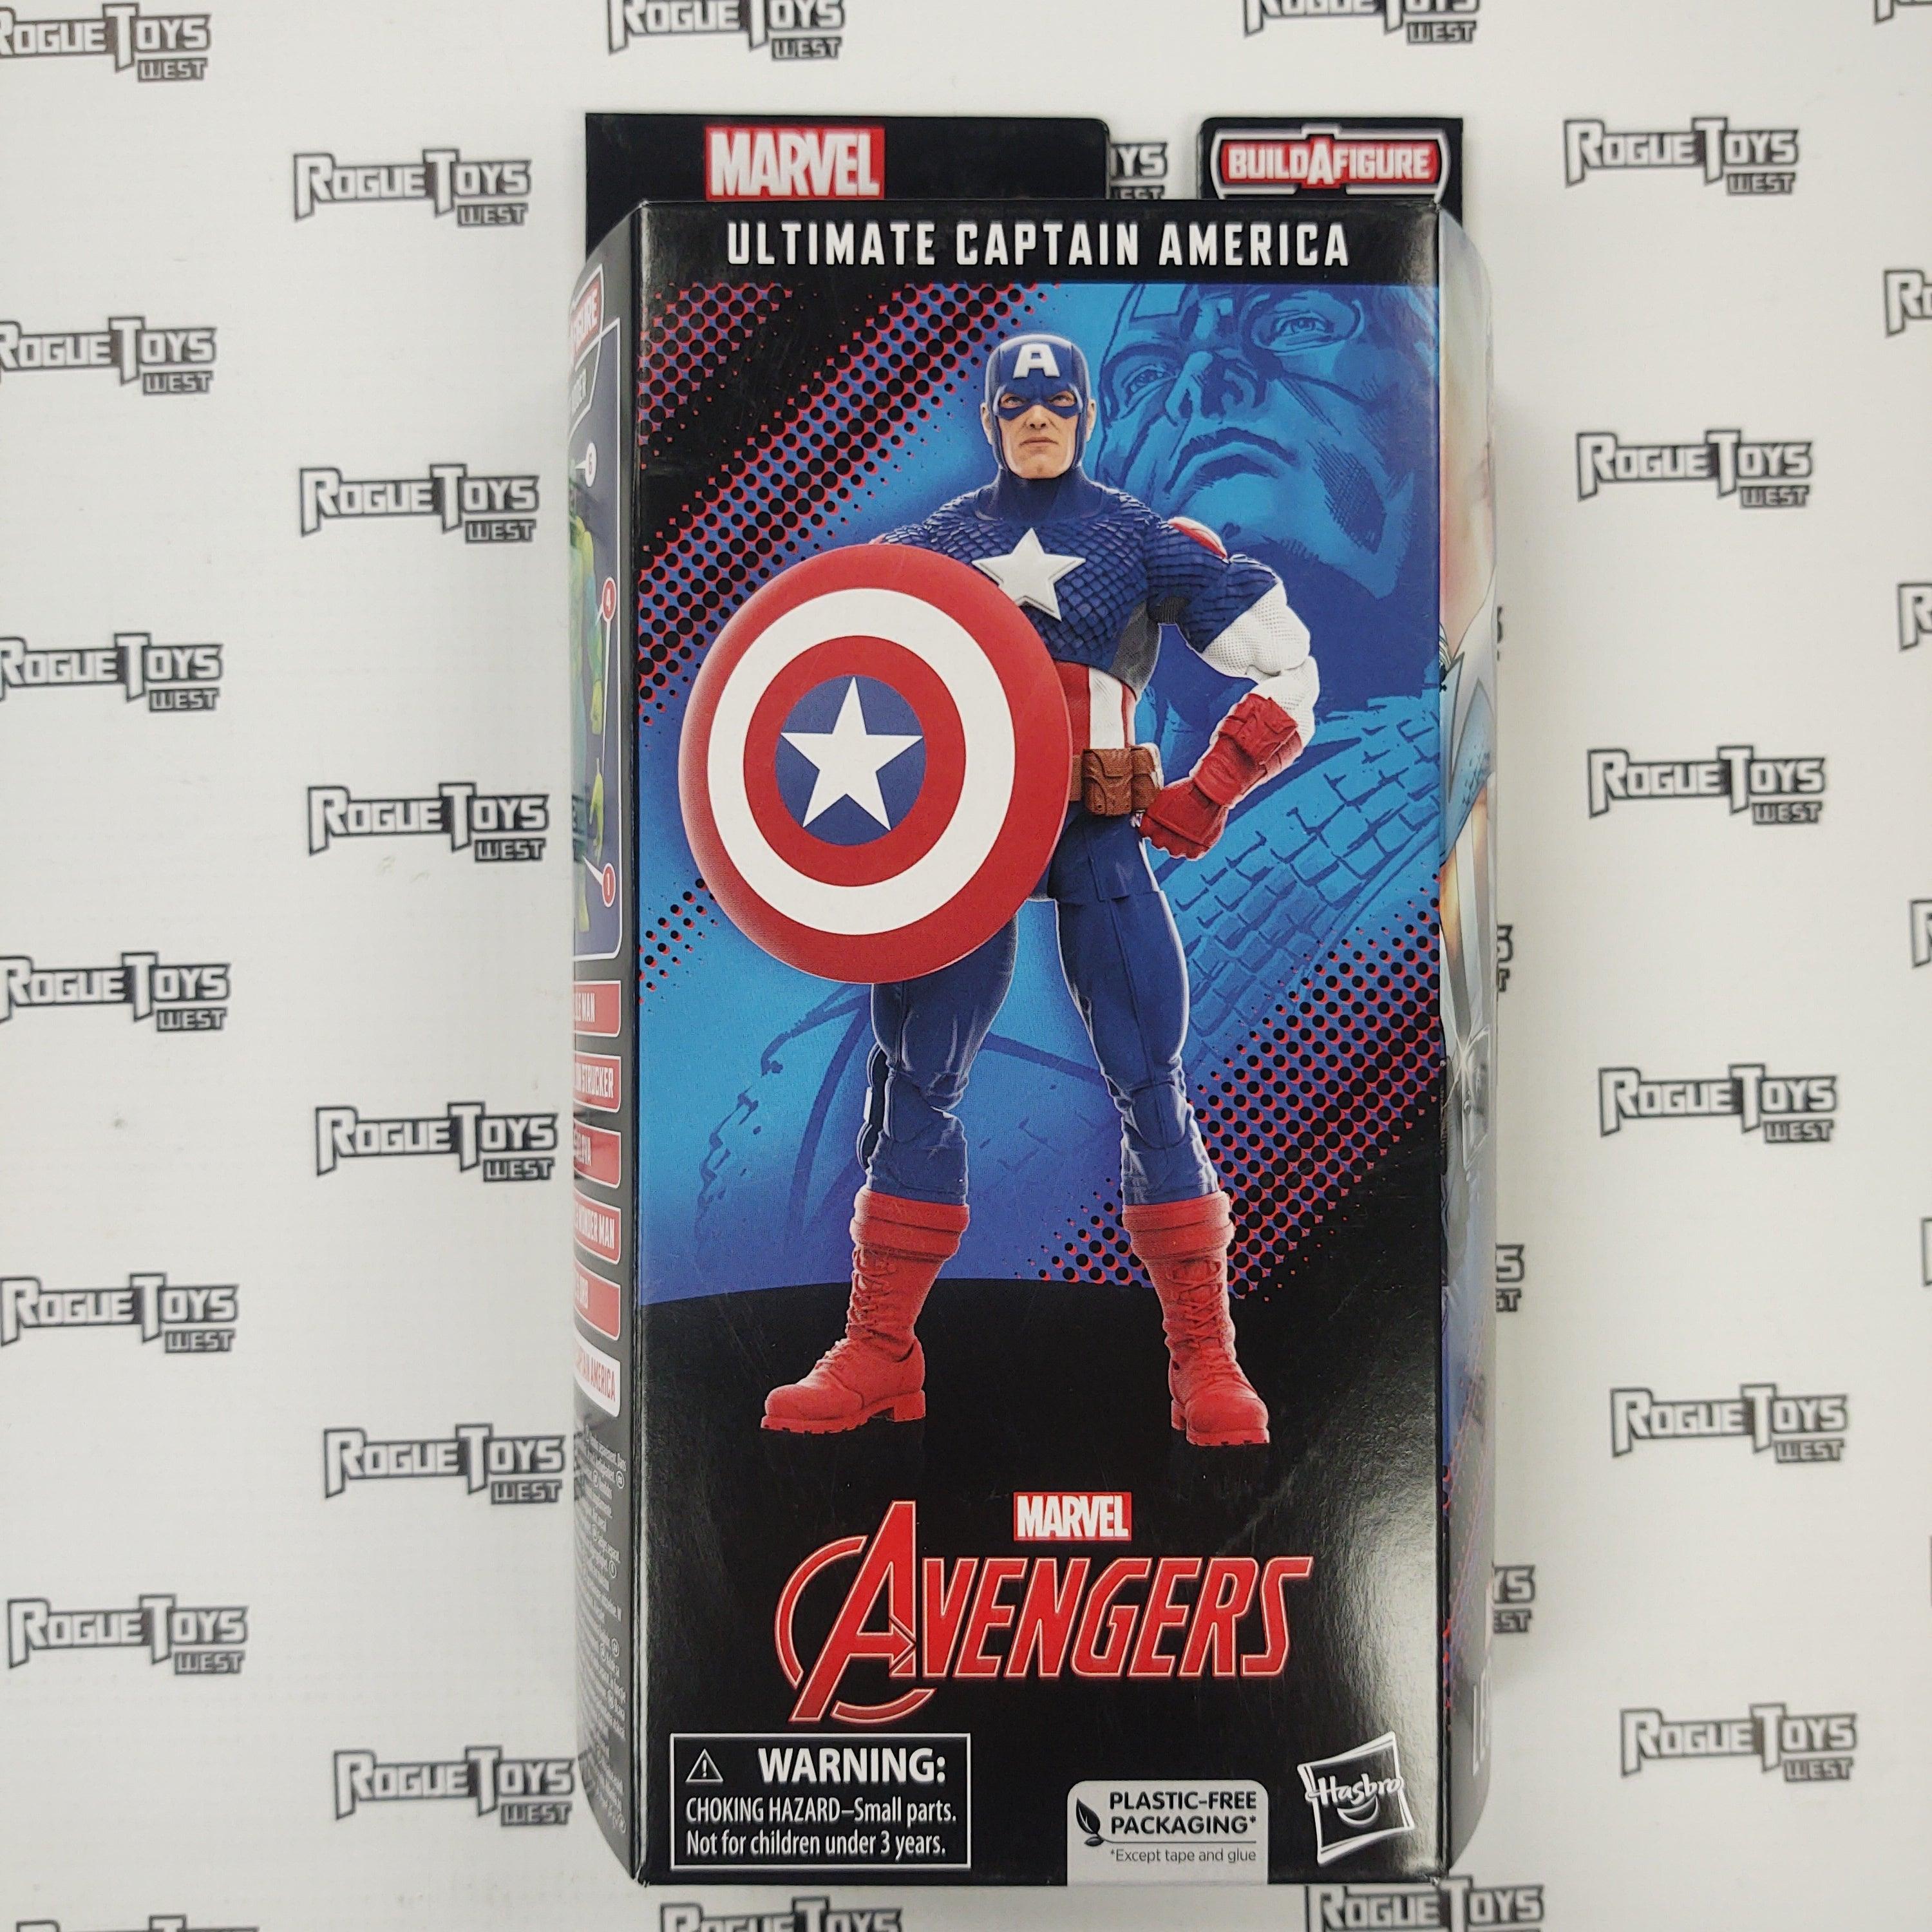 Hasbro Marvel Legends Avengers Ultimate Captain America (Puff Adder Wave) - Rogue Toys